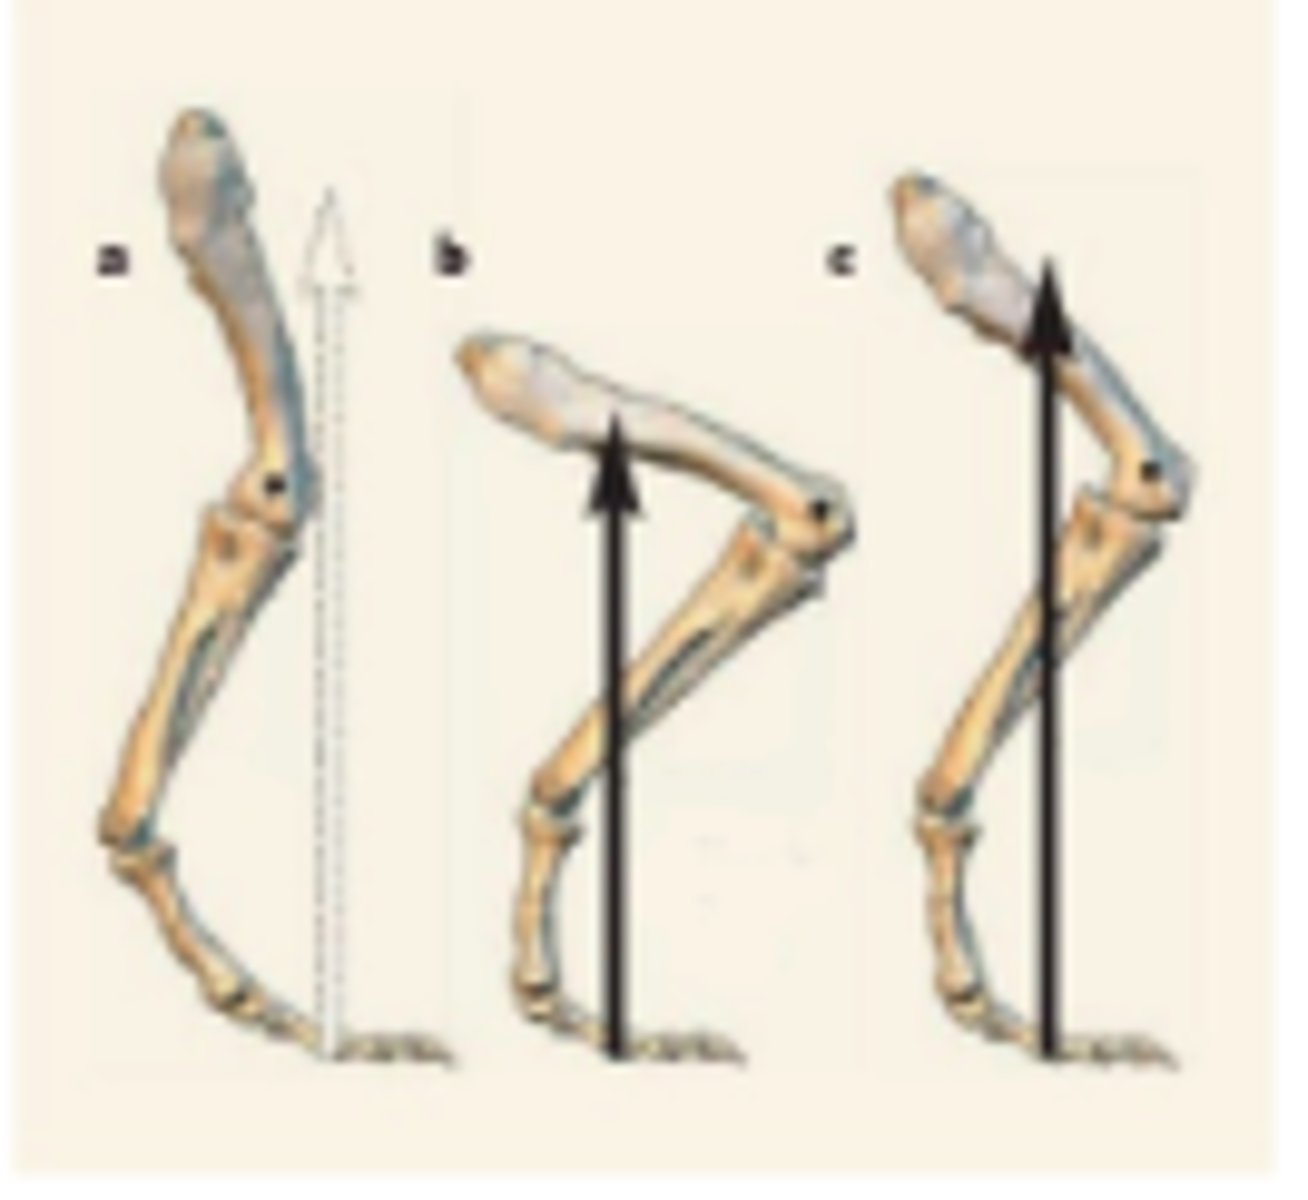 <p>In the figure below, which of the following situations has the longest moment arm for the knee?<br>A, B, or C?</p>